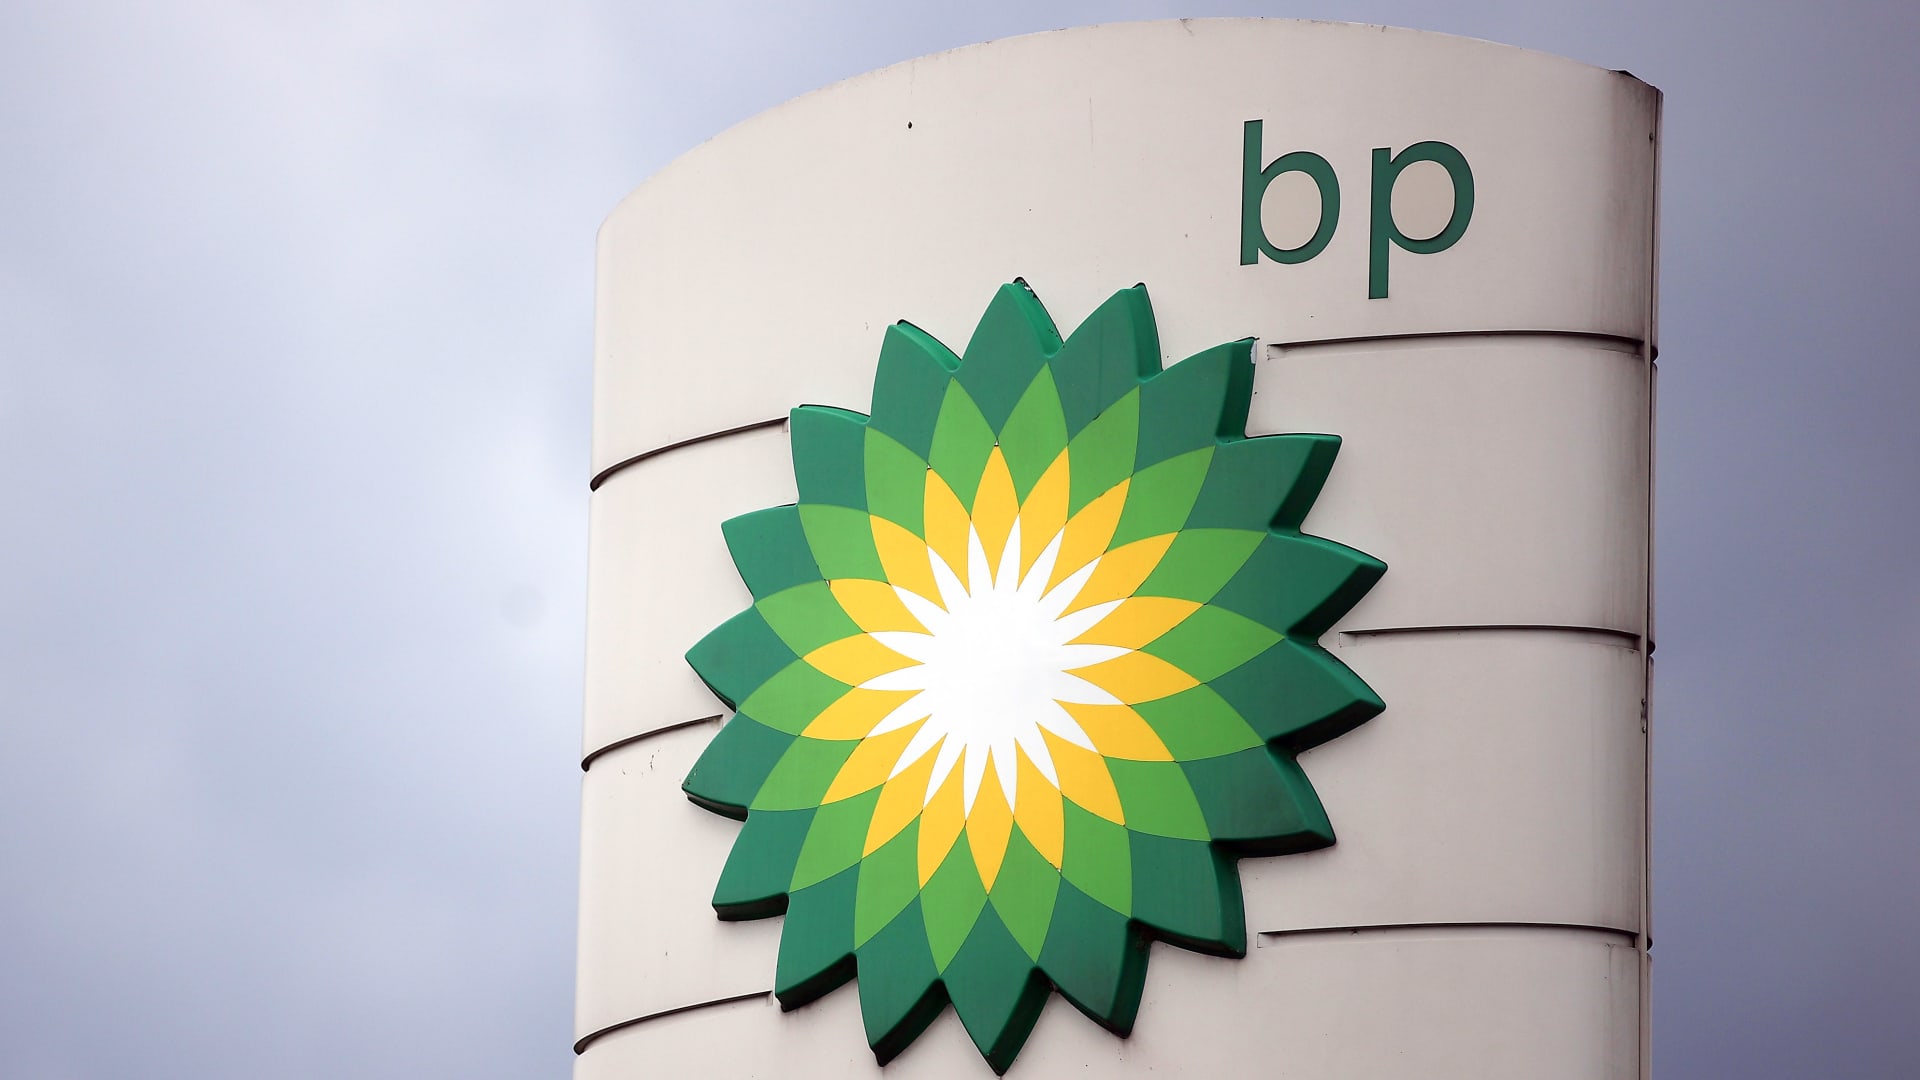 BP rakes in quarterly profit of .2 billion as oil majors post another round of bumper earnings